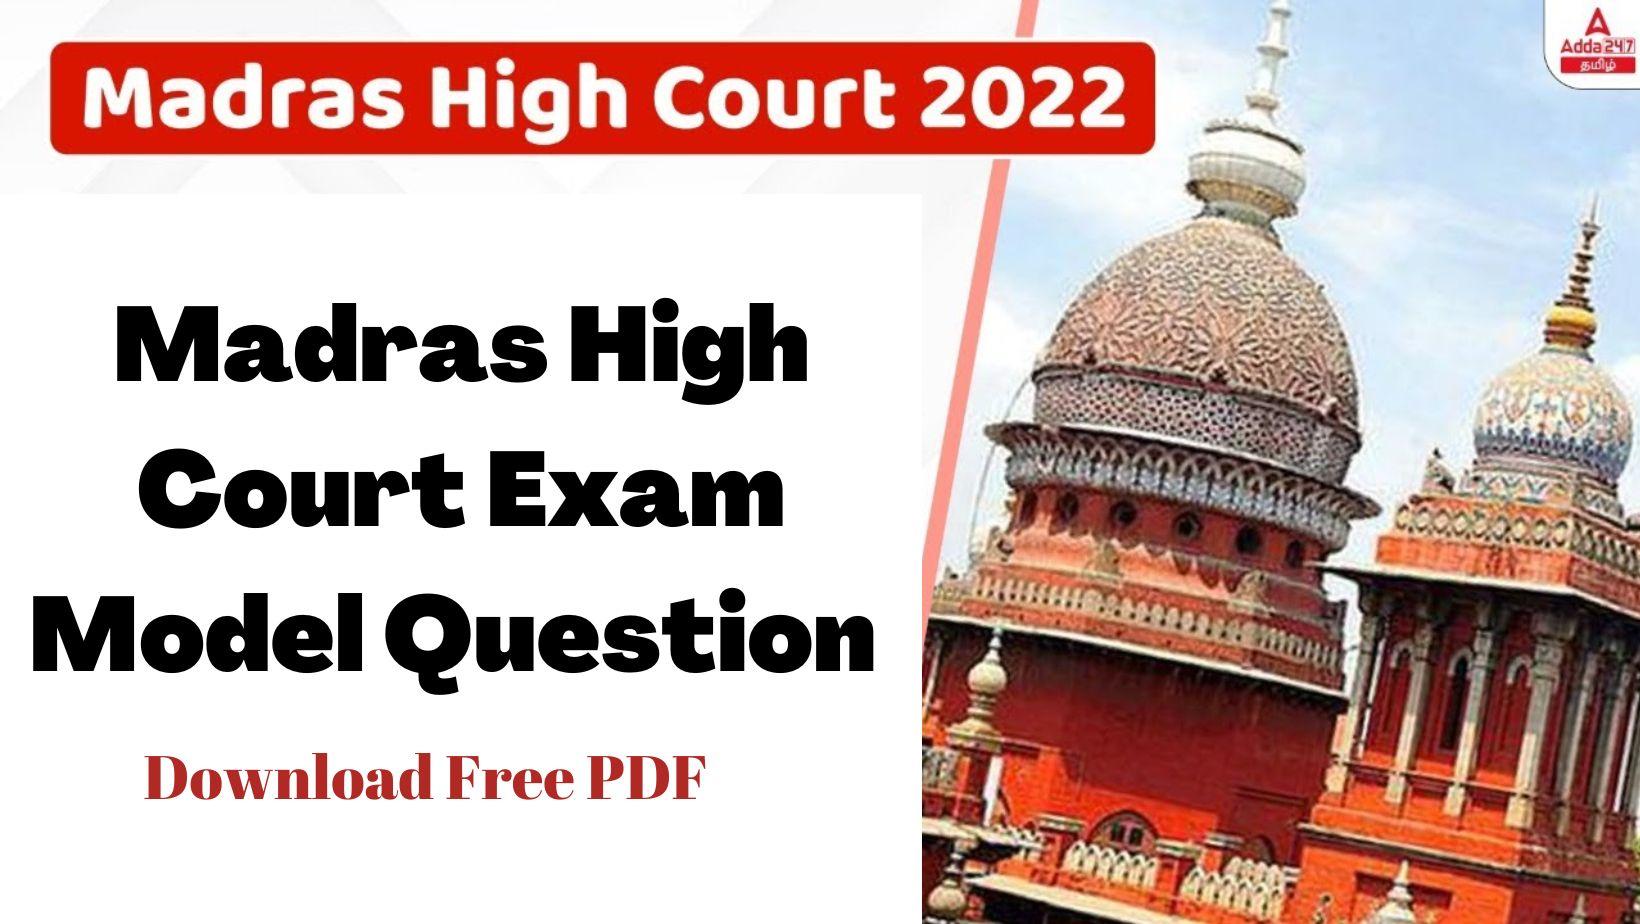 Madras High Court Model Question Paper